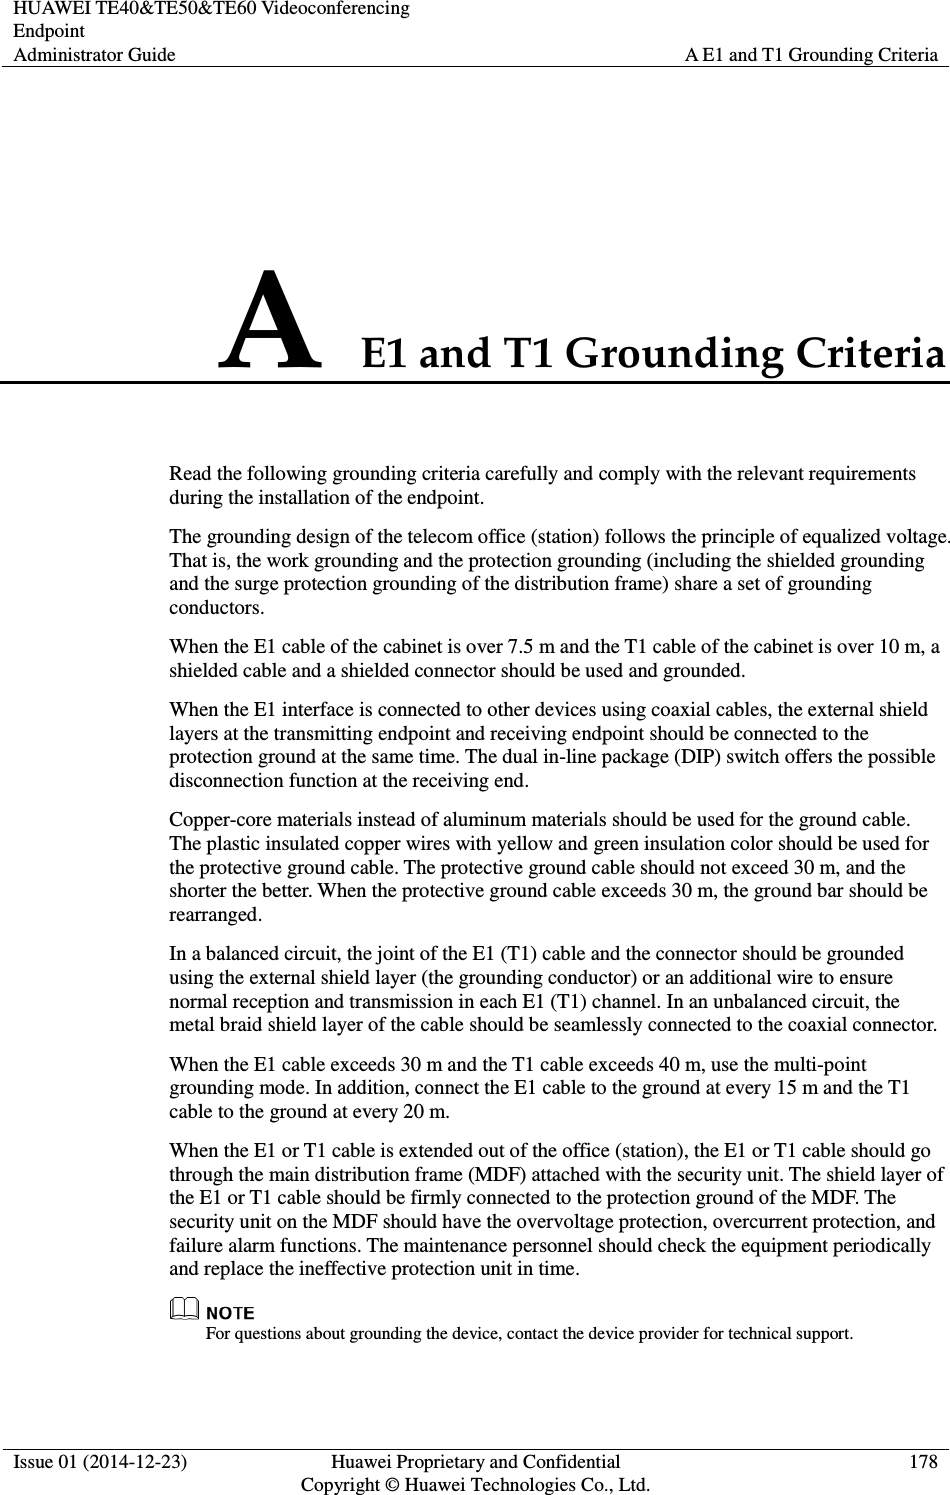 HUAWEI TE40&amp;TE50&amp;TE60 Videoconferencing Endpoint Administrator Guide  A E1 and T1 Grounding Criteria  Issue 01 (2014-12-23)  Huawei Proprietary and Confidential                                     Copyright © Huawei Technologies Co., Ltd. 178  A E1 and T1 Grounding Criteria Read the following grounding criteria carefully and comply with the relevant requirements during the installation of the endpoint. The grounding design of the telecom office (station) follows the principle of equalized voltage. That is, the work grounding and the protection grounding (including the shielded grounding and the surge protection grounding of the distribution frame) share a set of grounding conductors. When the E1 cable of the cabinet is over 7.5 m and the T1 cable of the cabinet is over 10 m, a shielded cable and a shielded connector should be used and grounded. When the E1 interface is connected to other devices using coaxial cables, the external shield layers at the transmitting endpoint and receiving endpoint should be connected to the protection ground at the same time. The dual in-line package (DIP) switch offers the possible disconnection function at the receiving end. Copper-core materials instead of aluminum materials should be used for the ground cable. The plastic insulated copper wires with yellow and green insulation color should be used for the protective ground cable. The protective ground cable should not exceed 30 m, and the shorter the better. When the protective ground cable exceeds 30 m, the ground bar should be rearranged. In a balanced circuit, the joint of the E1 (T1) cable and the connector should be grounded using the external shield layer (the grounding conductor) or an additional wire to ensure normal reception and transmission in each E1 (T1) channel. In an unbalanced circuit, the metal braid shield layer of the cable should be seamlessly connected to the coaxial connector. When the E1 cable exceeds 30 m and the T1 cable exceeds 40 m, use the multi-point grounding mode. In addition, connect the E1 cable to the ground at every 15 m and the T1 cable to the ground at every 20 m. When the E1 or T1 cable is extended out of the office (station), the E1 or T1 cable should go through the main distribution frame (MDF) attached with the security unit. The shield layer of the E1 or T1 cable should be firmly connected to the protection ground of the MDF. The security unit on the MDF should have the overvoltage protection, overcurrent protection, and failure alarm functions. The maintenance personnel should check the equipment periodically and replace the ineffective protection unit in time.  For questions about grounding the device, contact the device provider for technical support. 